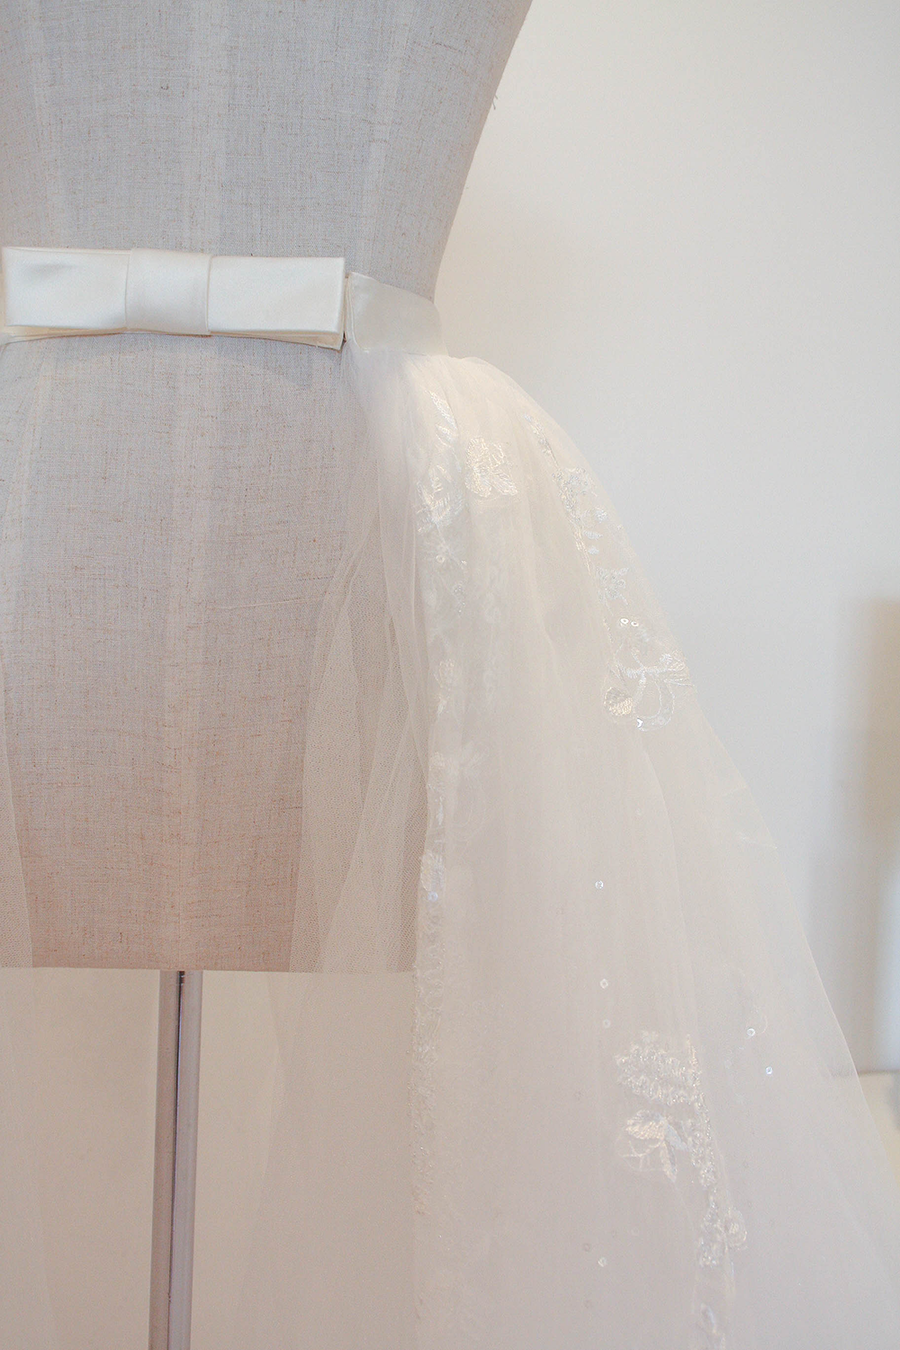 Tulle I Wedding Add On Skirt - made to measure